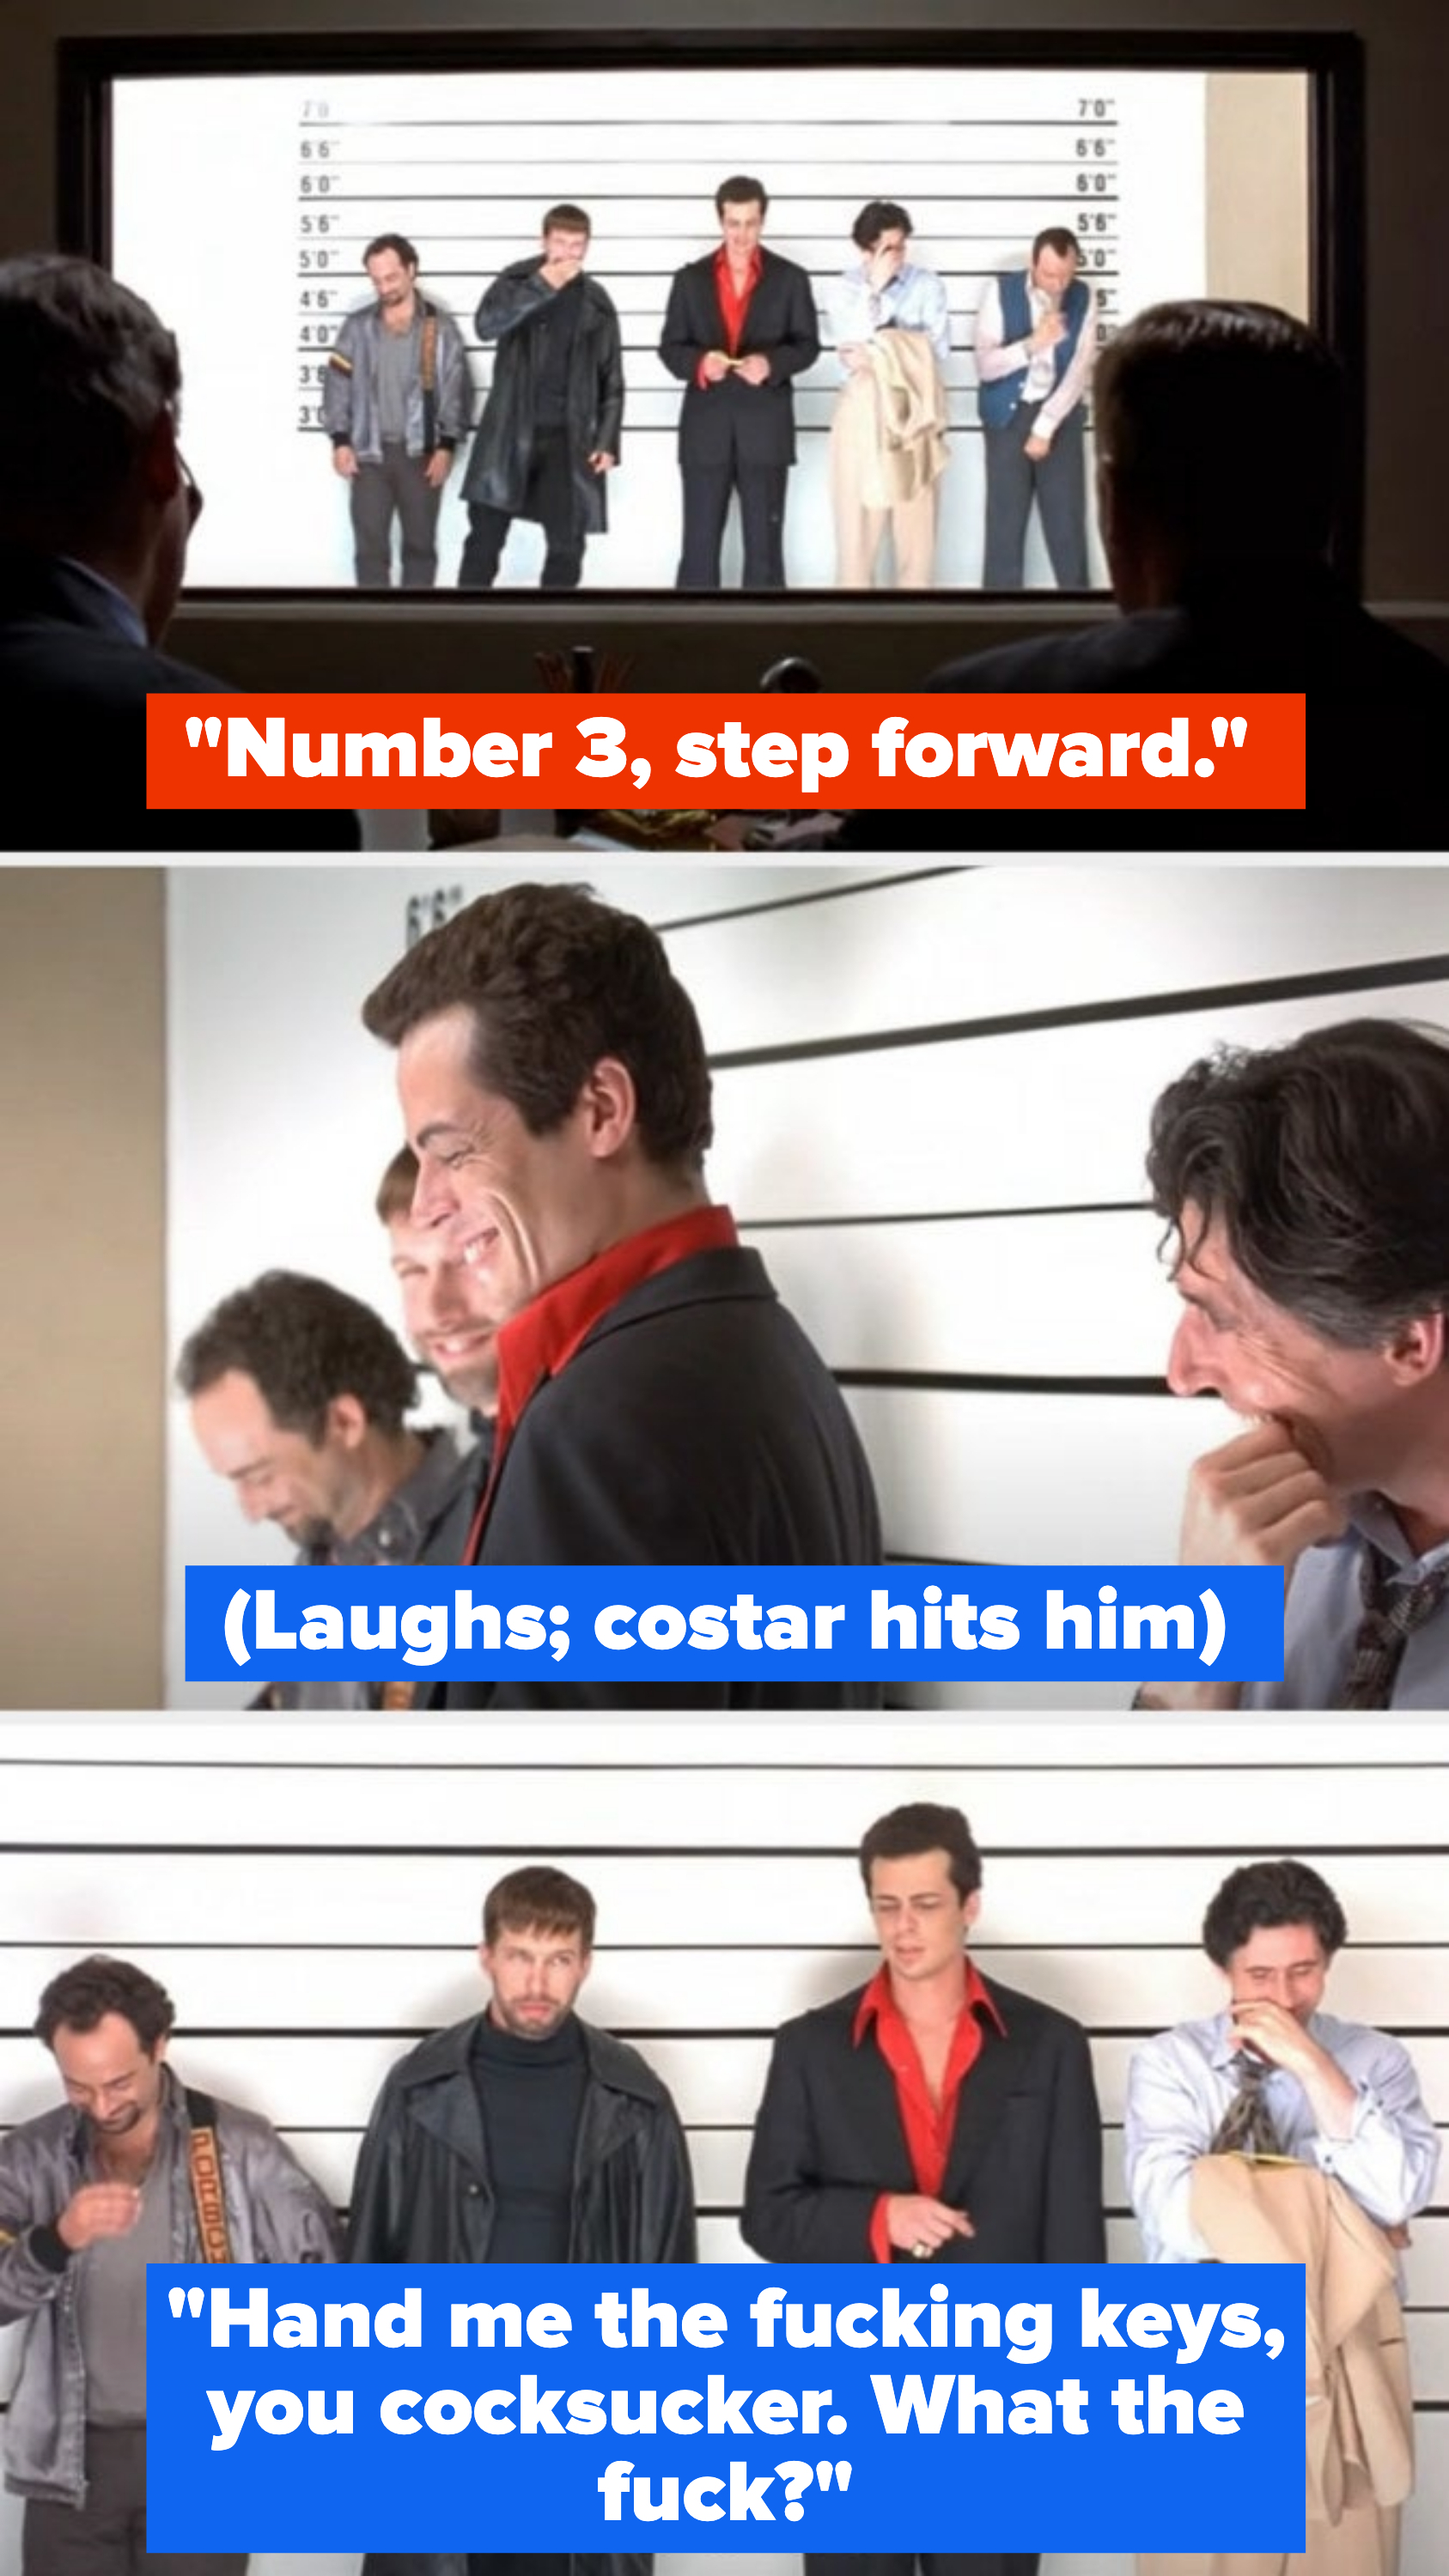 After &quot;Number 3, step forward&quot; line, Benicio starts talking, a costar hits him and laughs, and he says &quot;Hand me the fucking keys, you cocksucker; what the fuck?&quot;